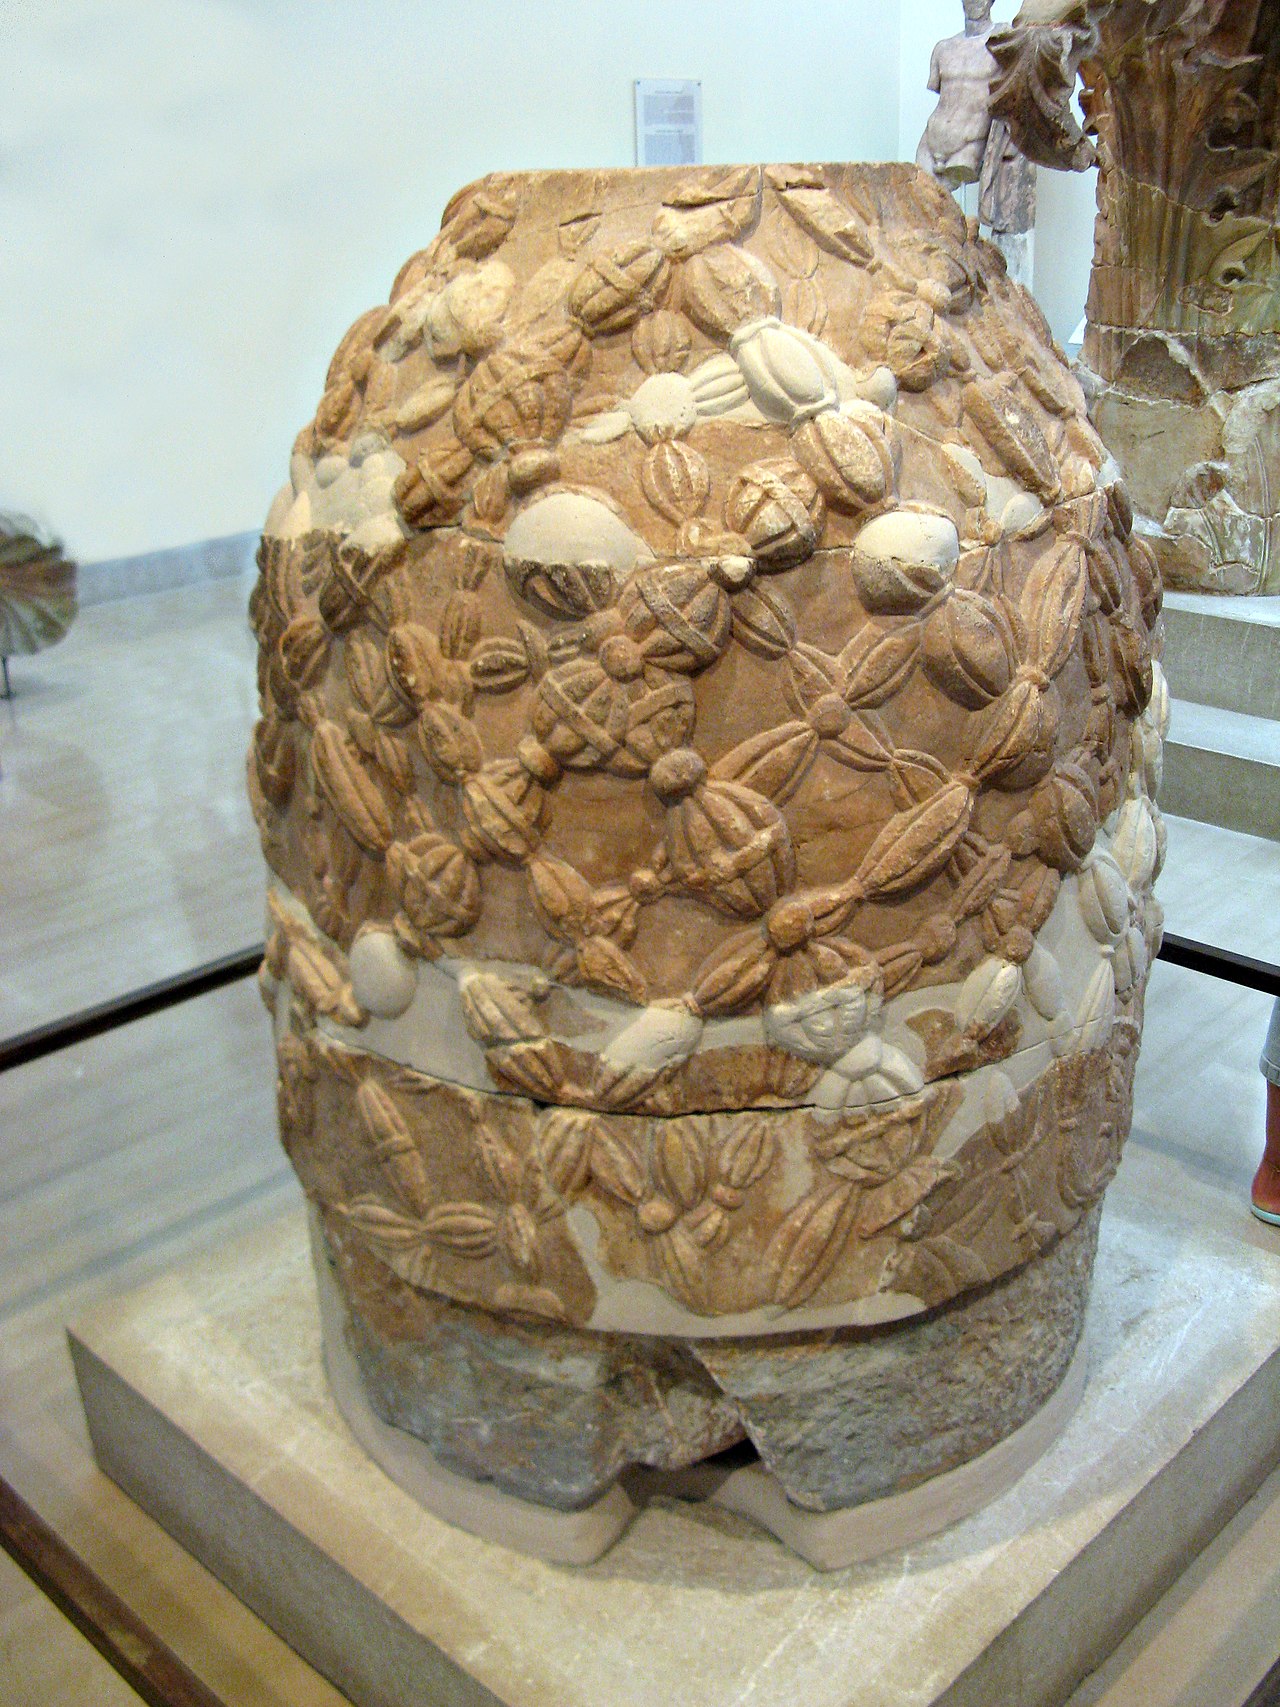 The Omphalos of Delphi, a religious stone artifact with a carving of a net and a hollow center. 